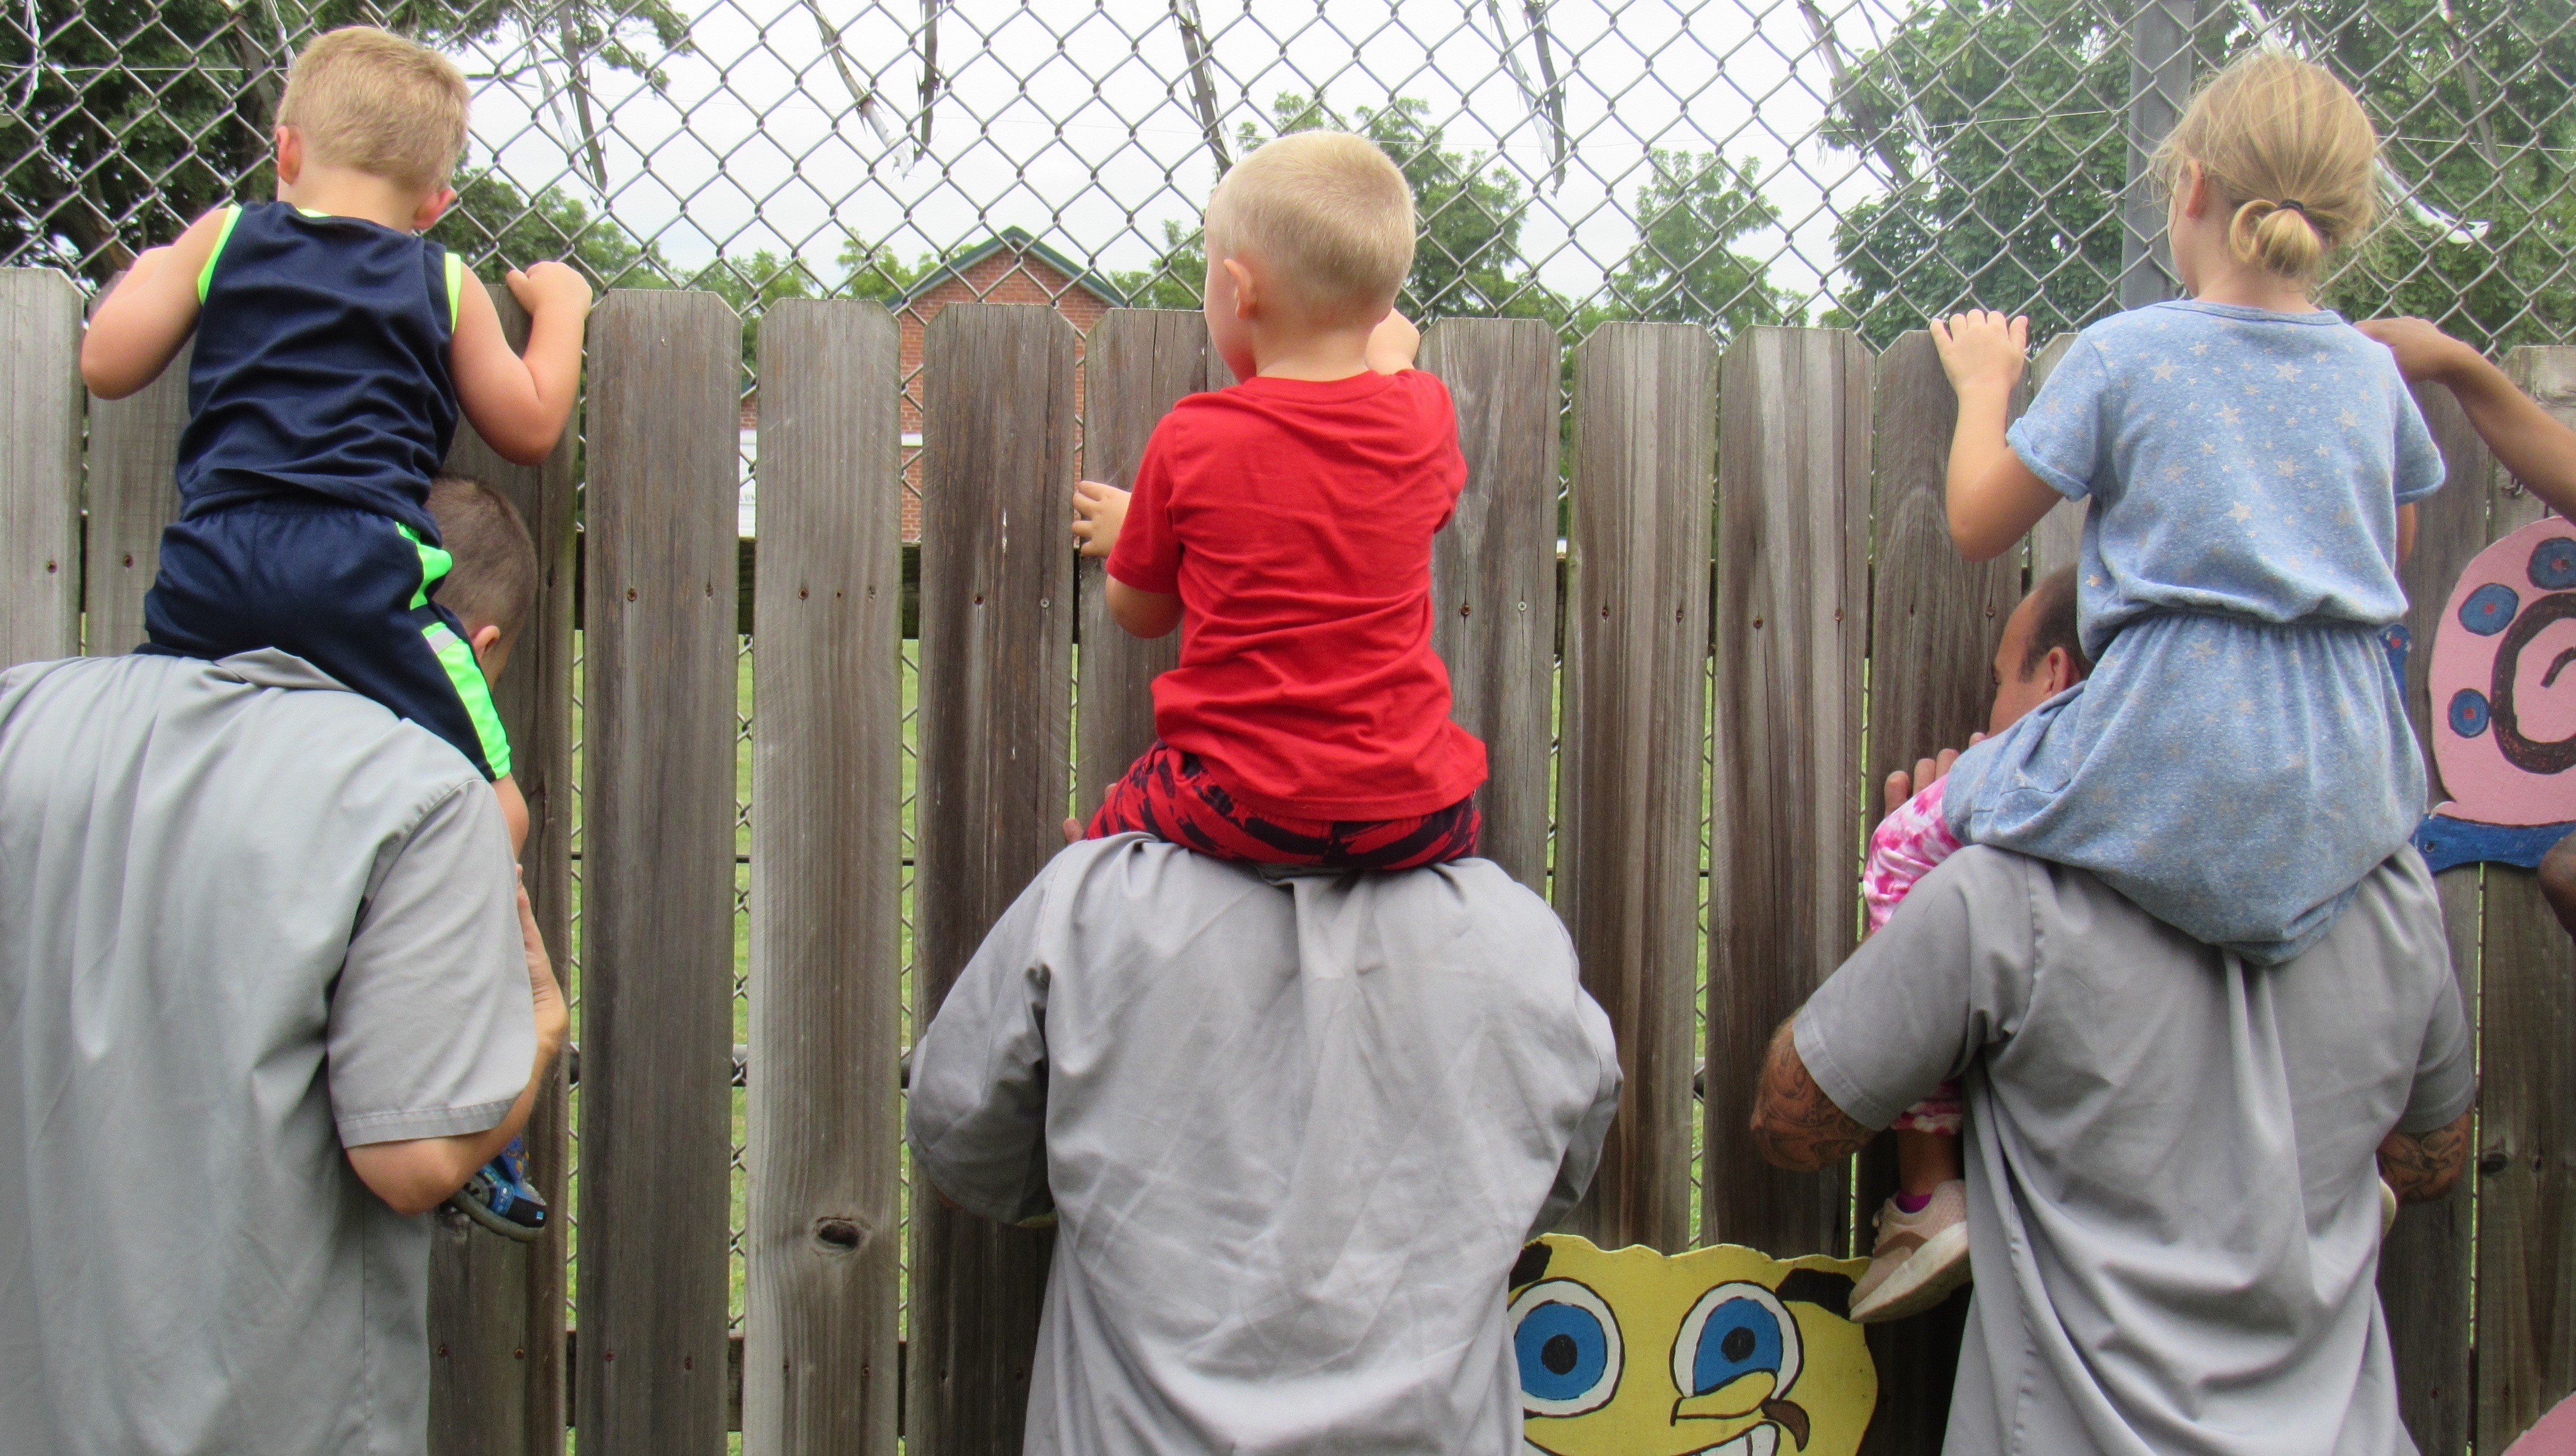 Kids sit on their dads' shoulders in an outside play area on correctional center grounds.